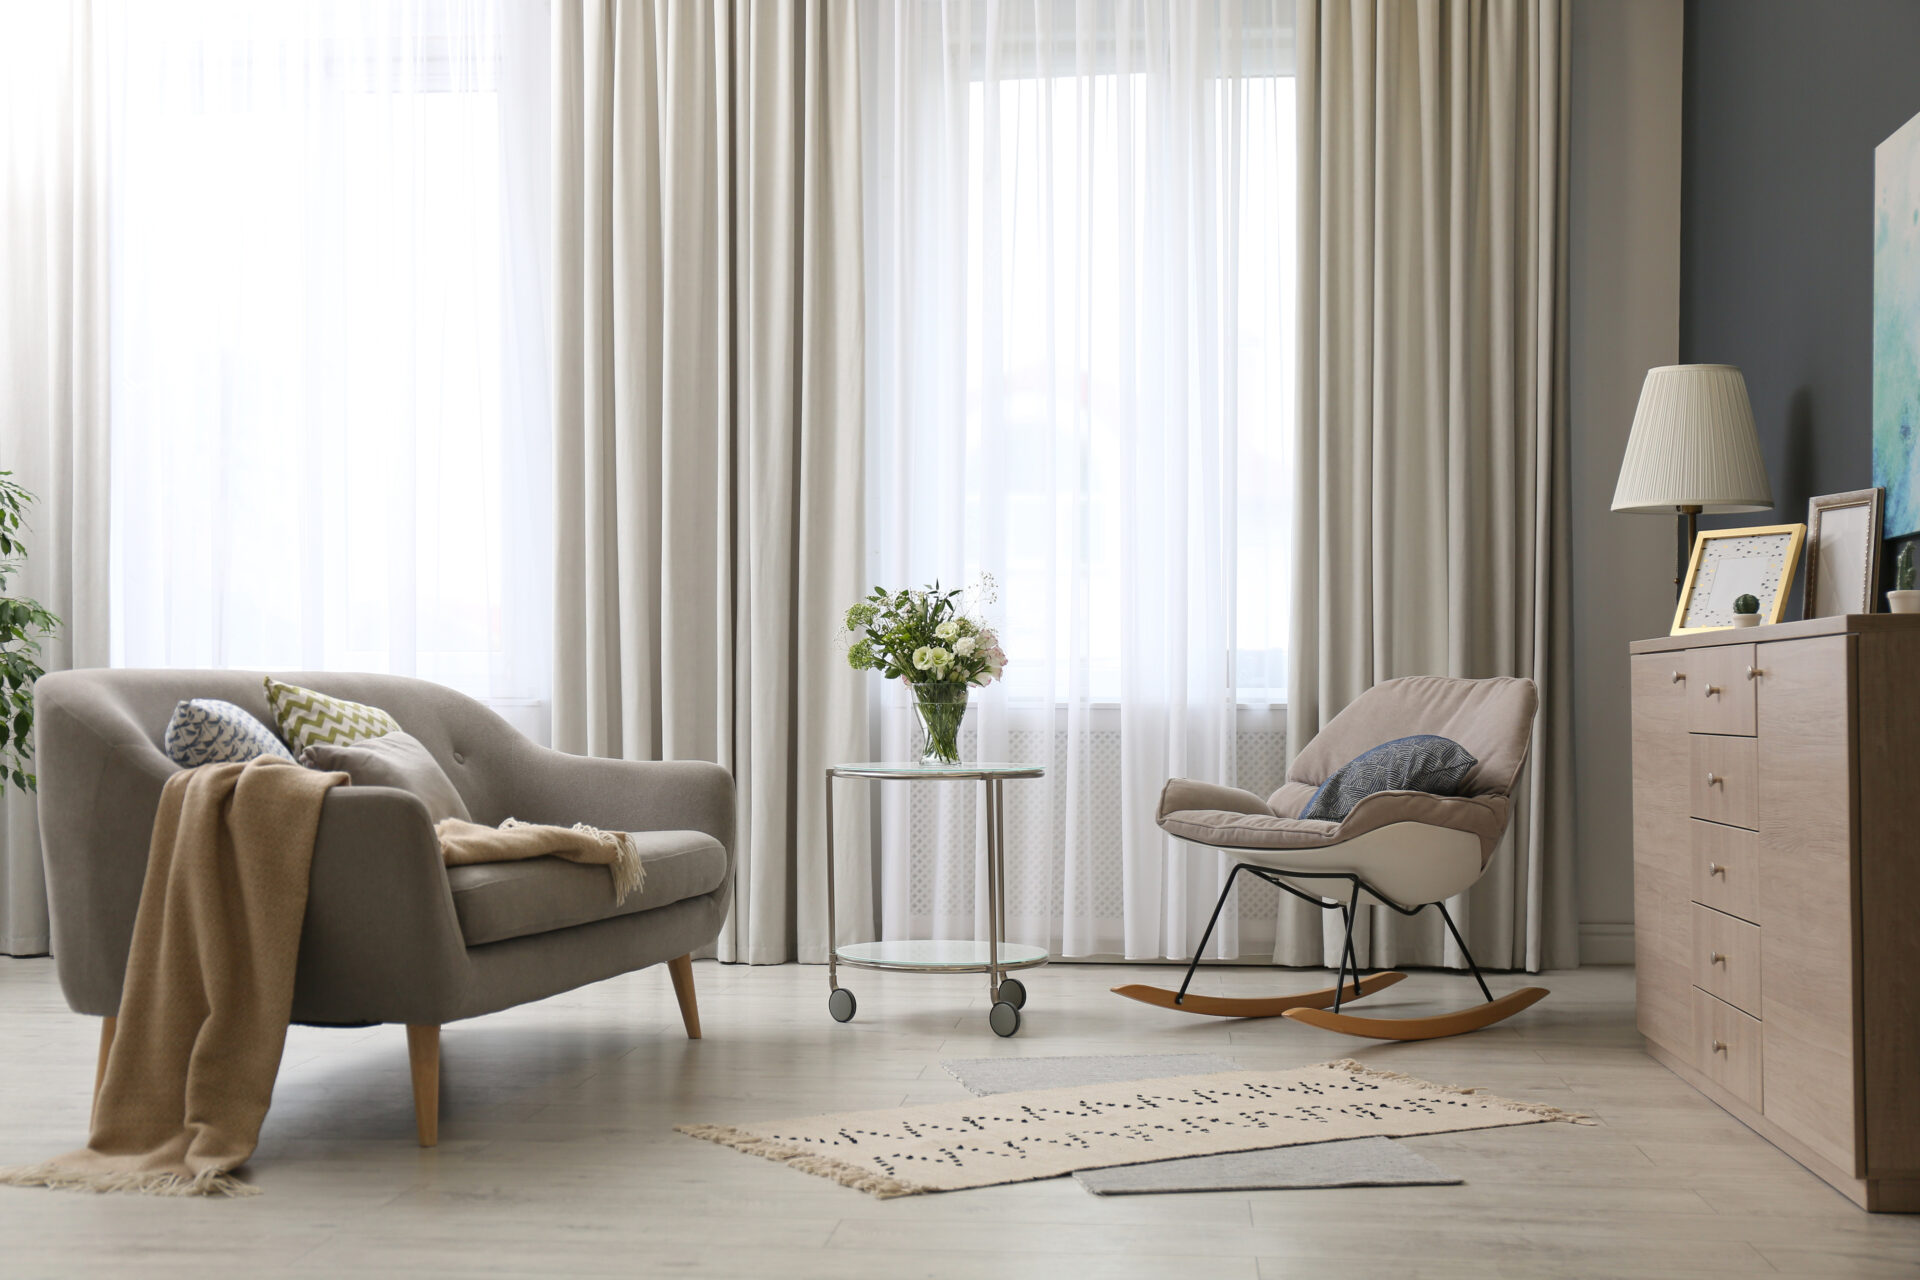 Modern living room interior with fabric curtains as window blinds. Wholesale Blind Factory